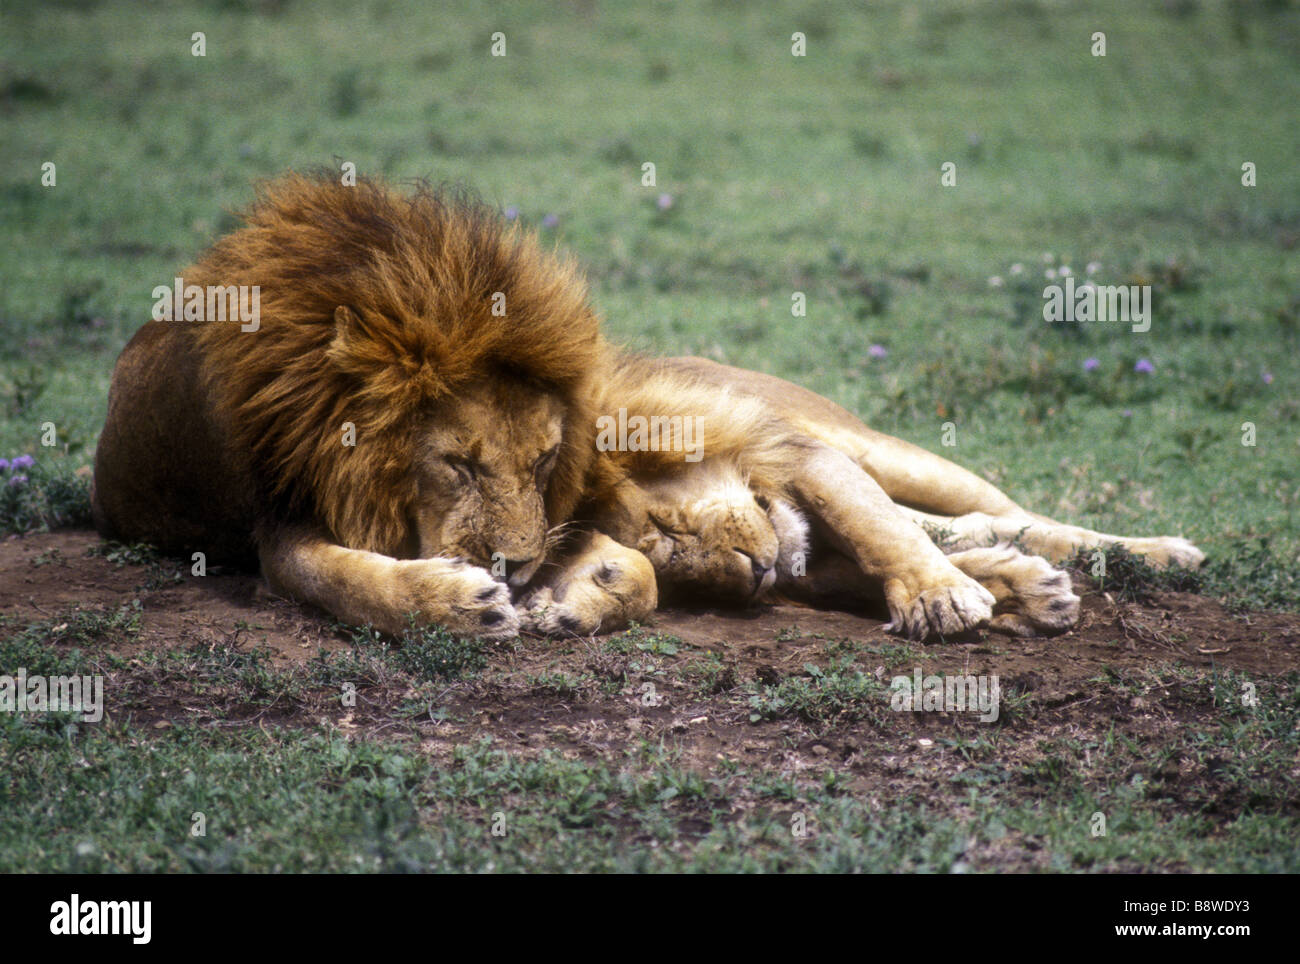 Two mature male lions with big manes sleeping together side by side Serengeti National Park Tanzania East Africa Stock Photo